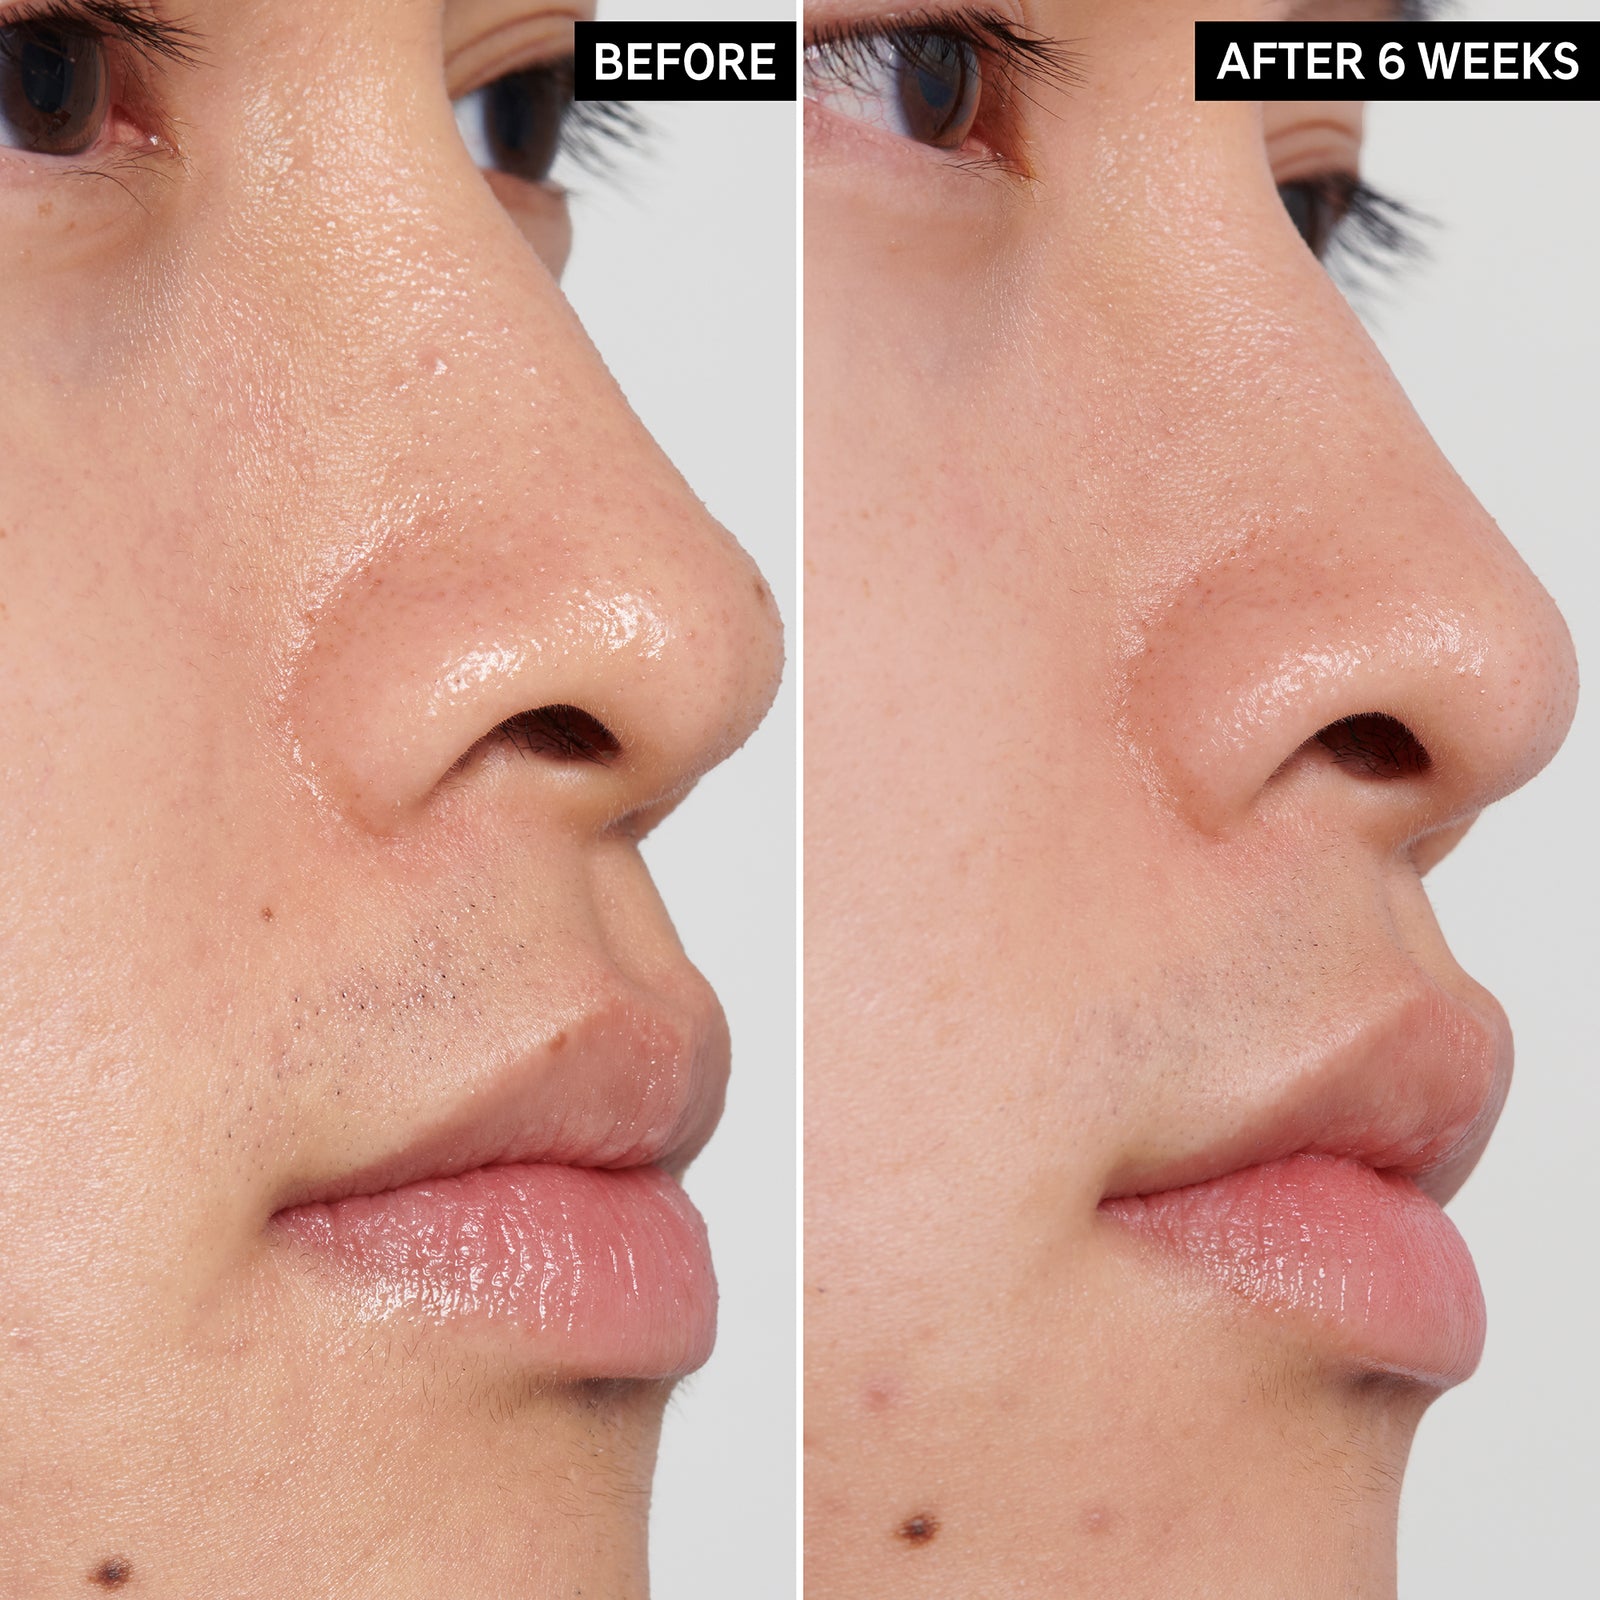 Two images of a model's face side by side to show before and after using PHA Toner for 6 weeks